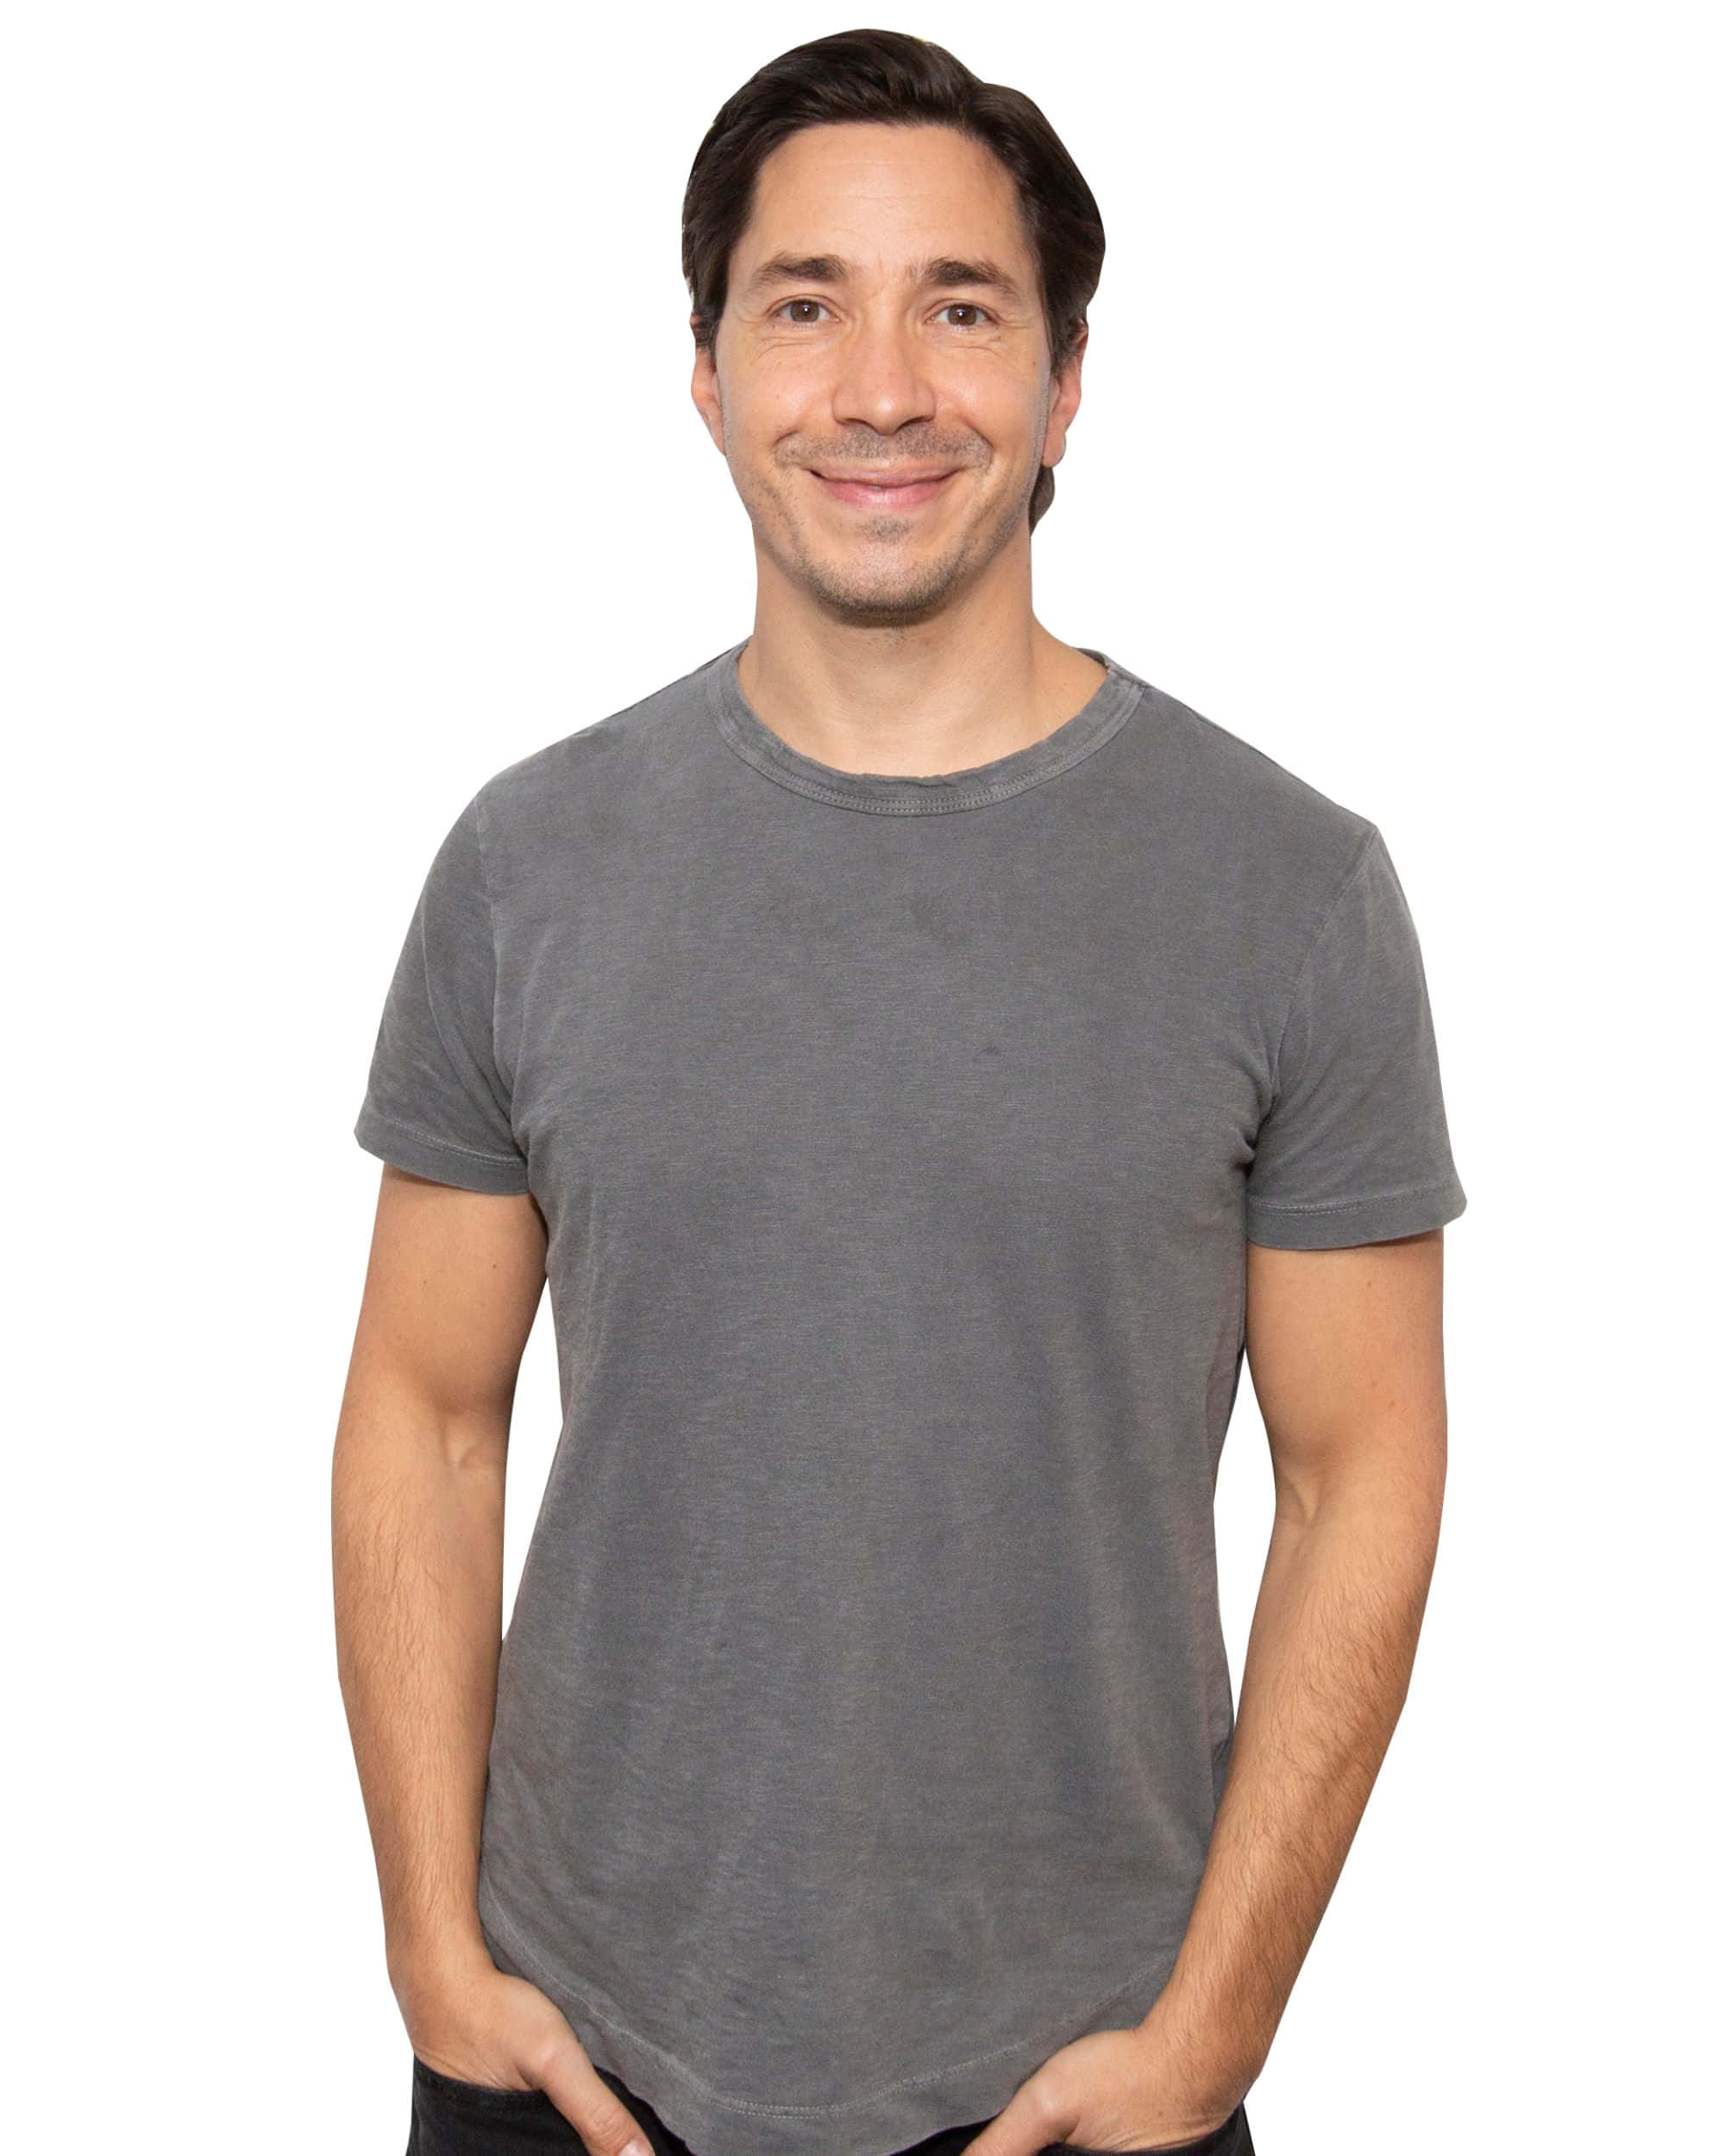 Justin Long posing for a photoshoot Wallpaper